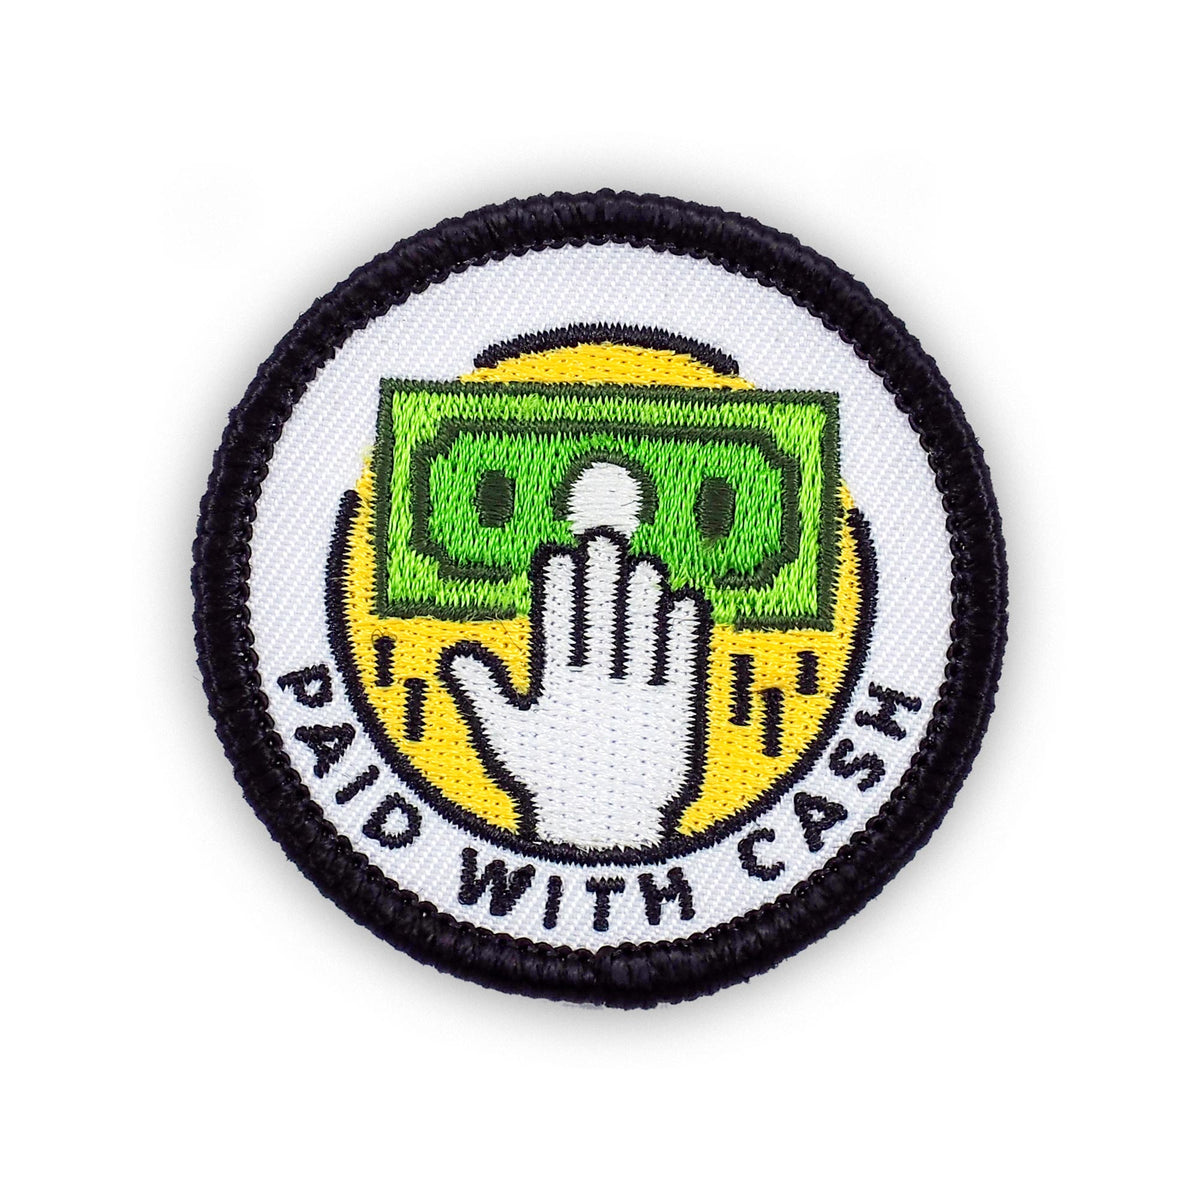 Paid With Cash adulting merit badge patch for adults